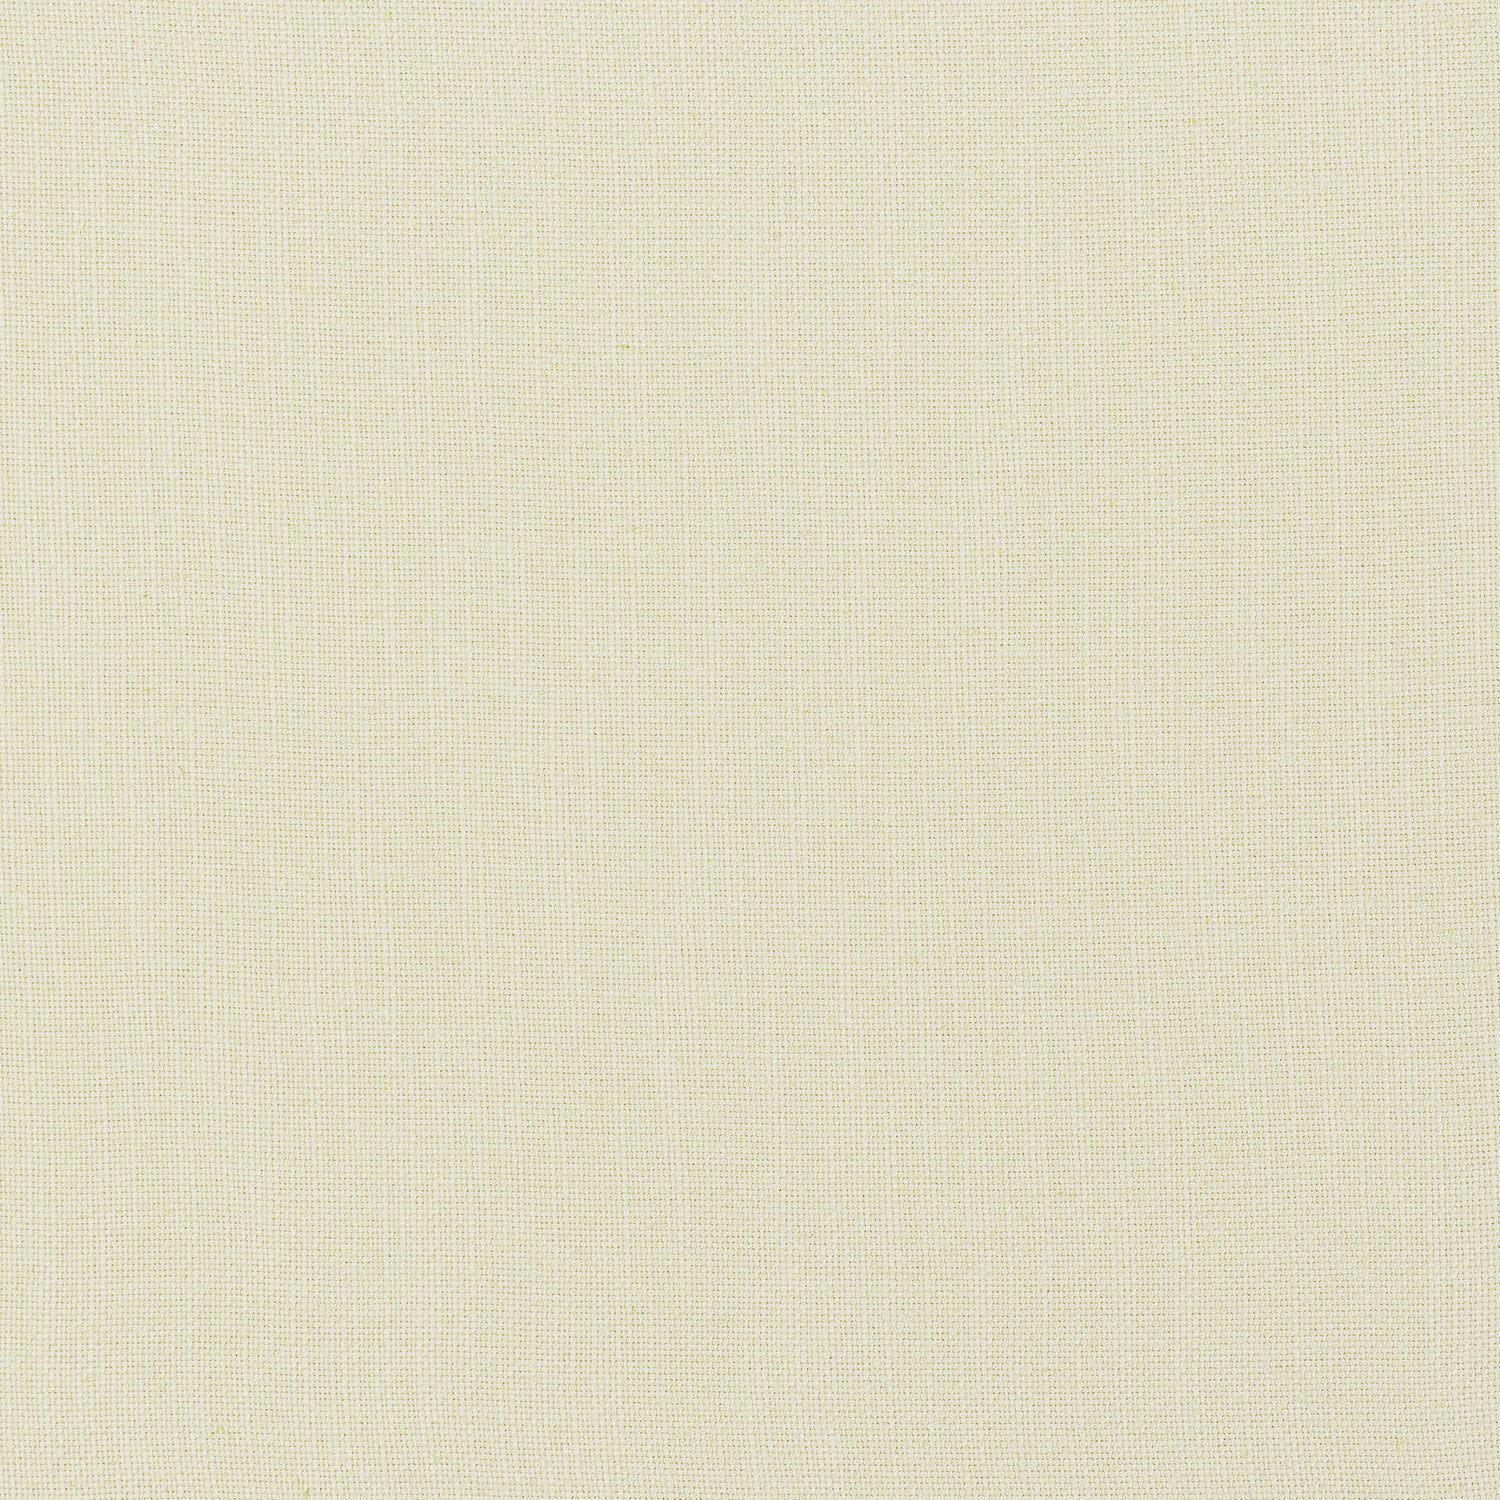 Palisade Linen fabric in green tea color - pattern number FWW7656 - by Thibaut in the Palisades collection